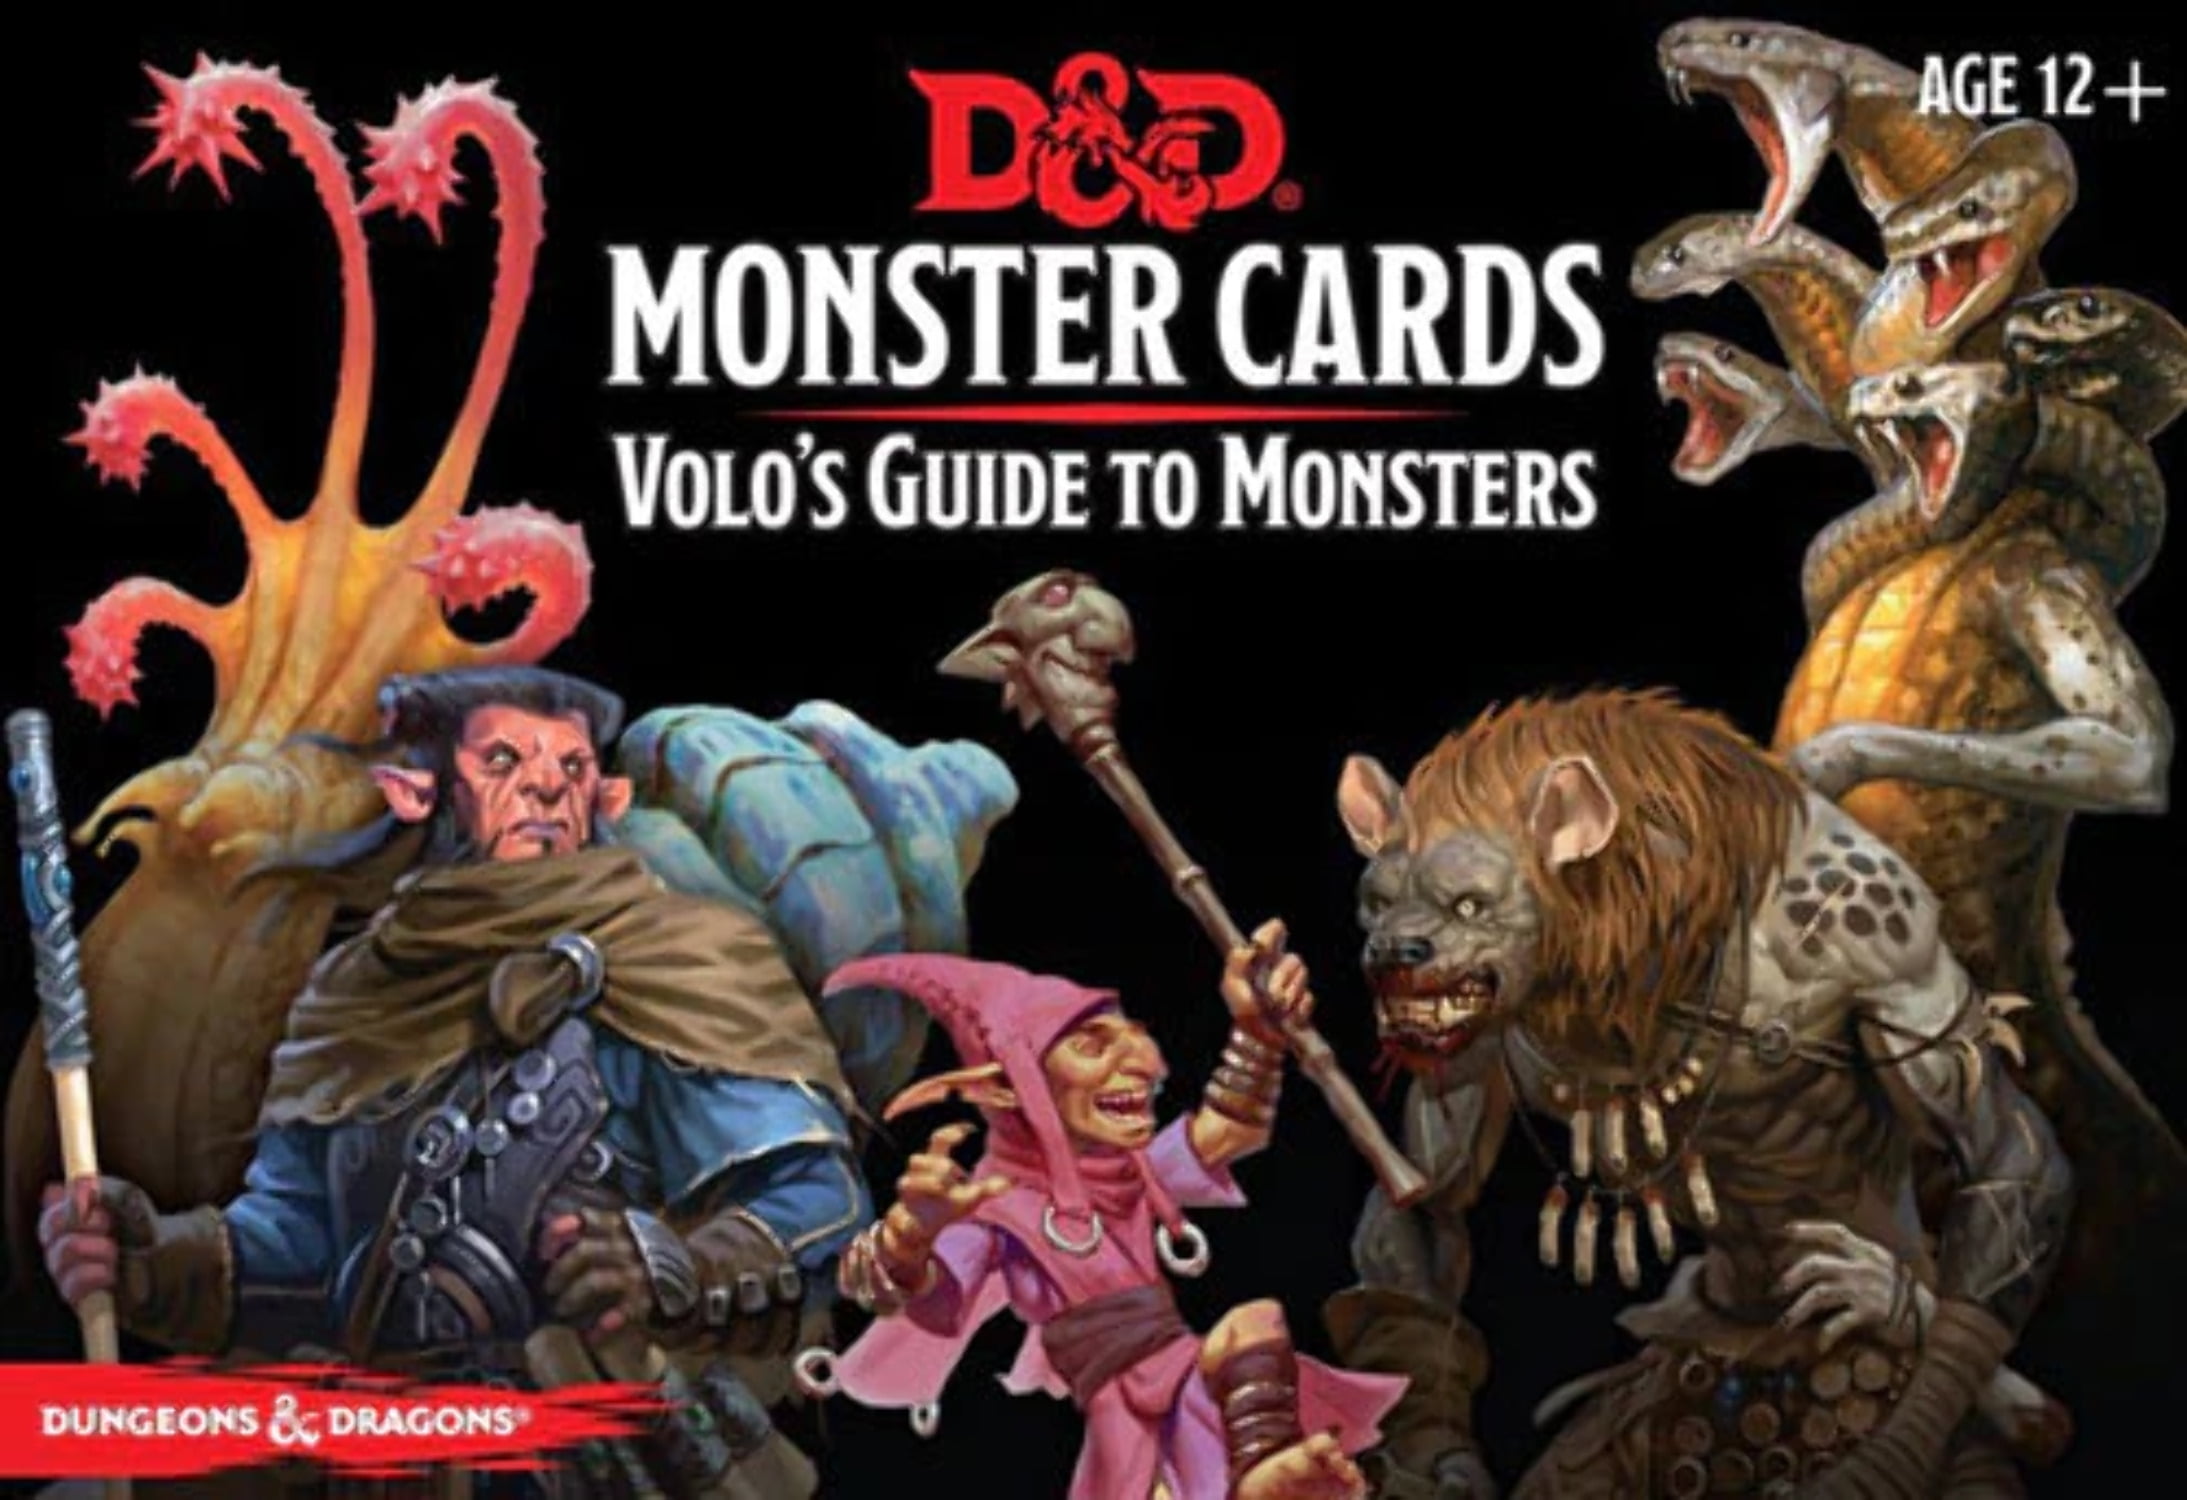 Gf9c7227000 Volos Guide Deck Dungeons & Dragons Monster Game Cards